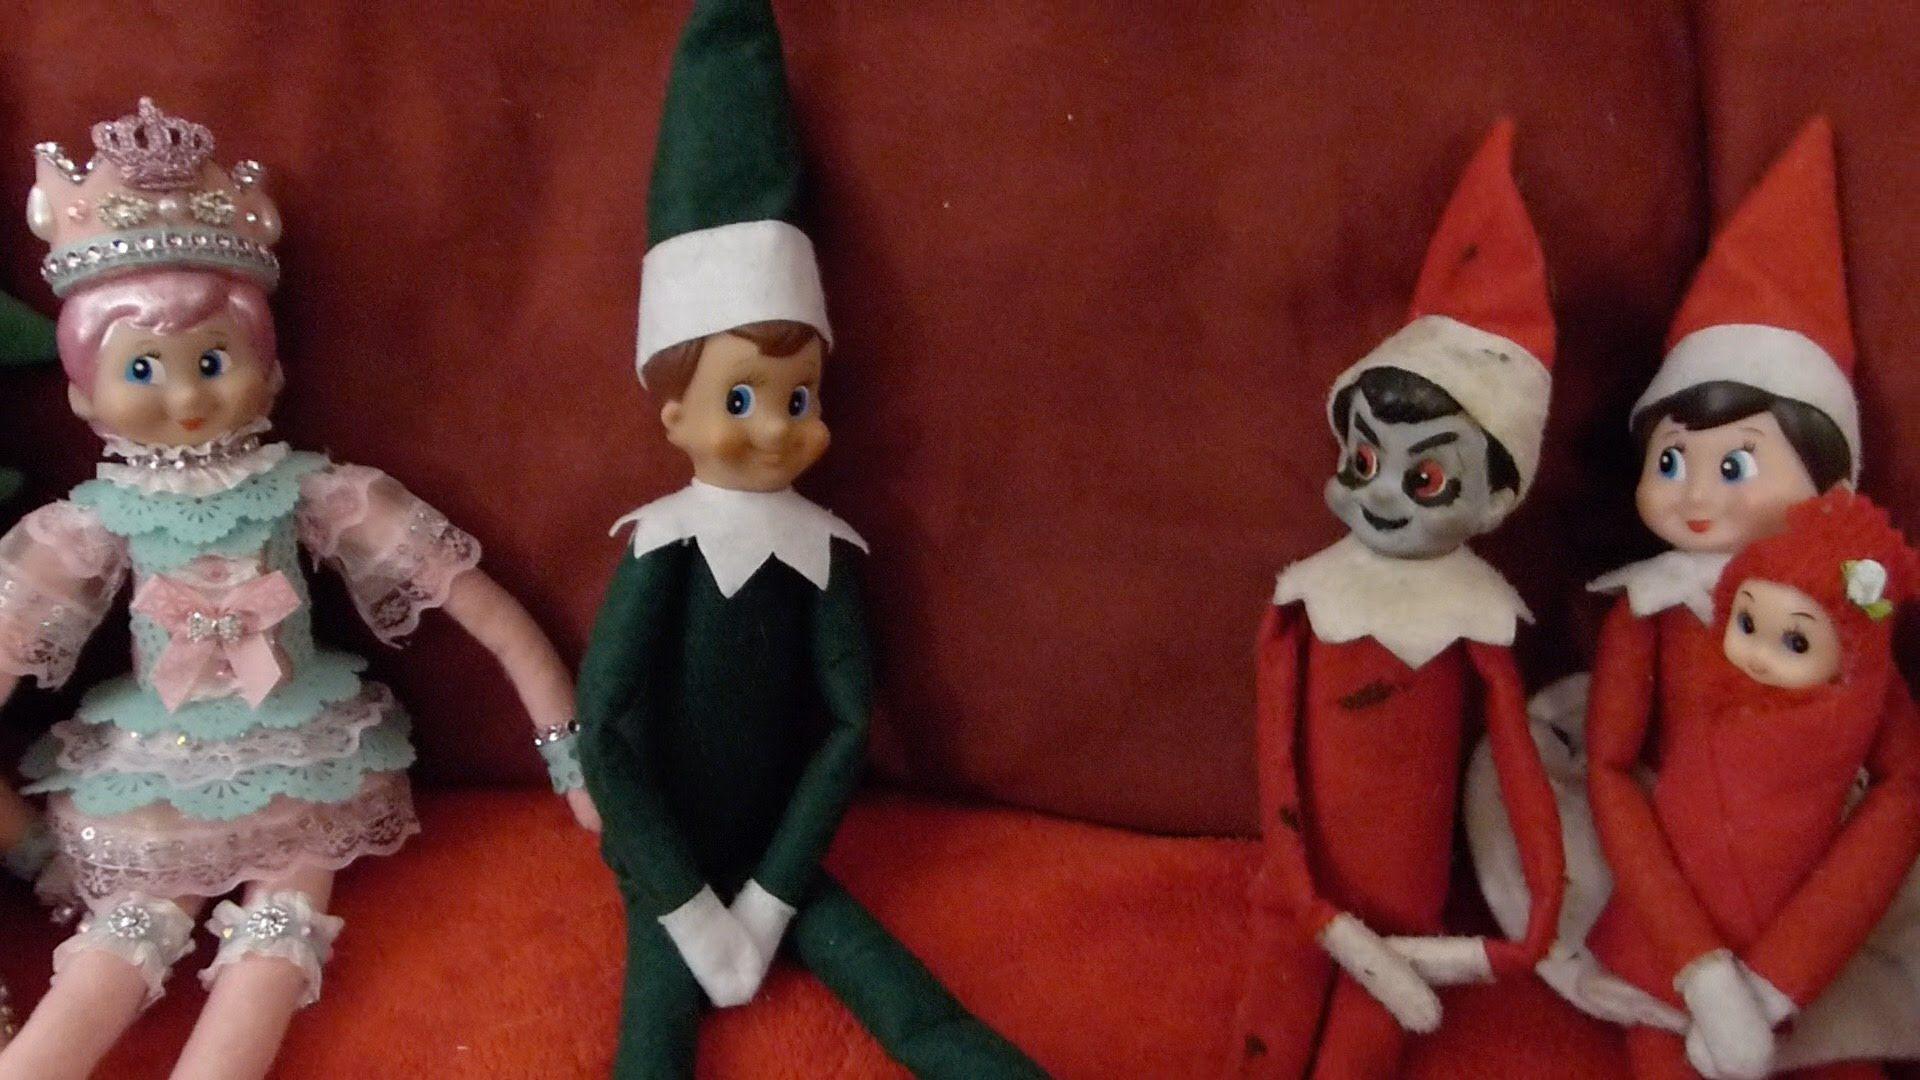 Local mom creates Elf on the Shelf kits to help make the holidays easier  for busy families